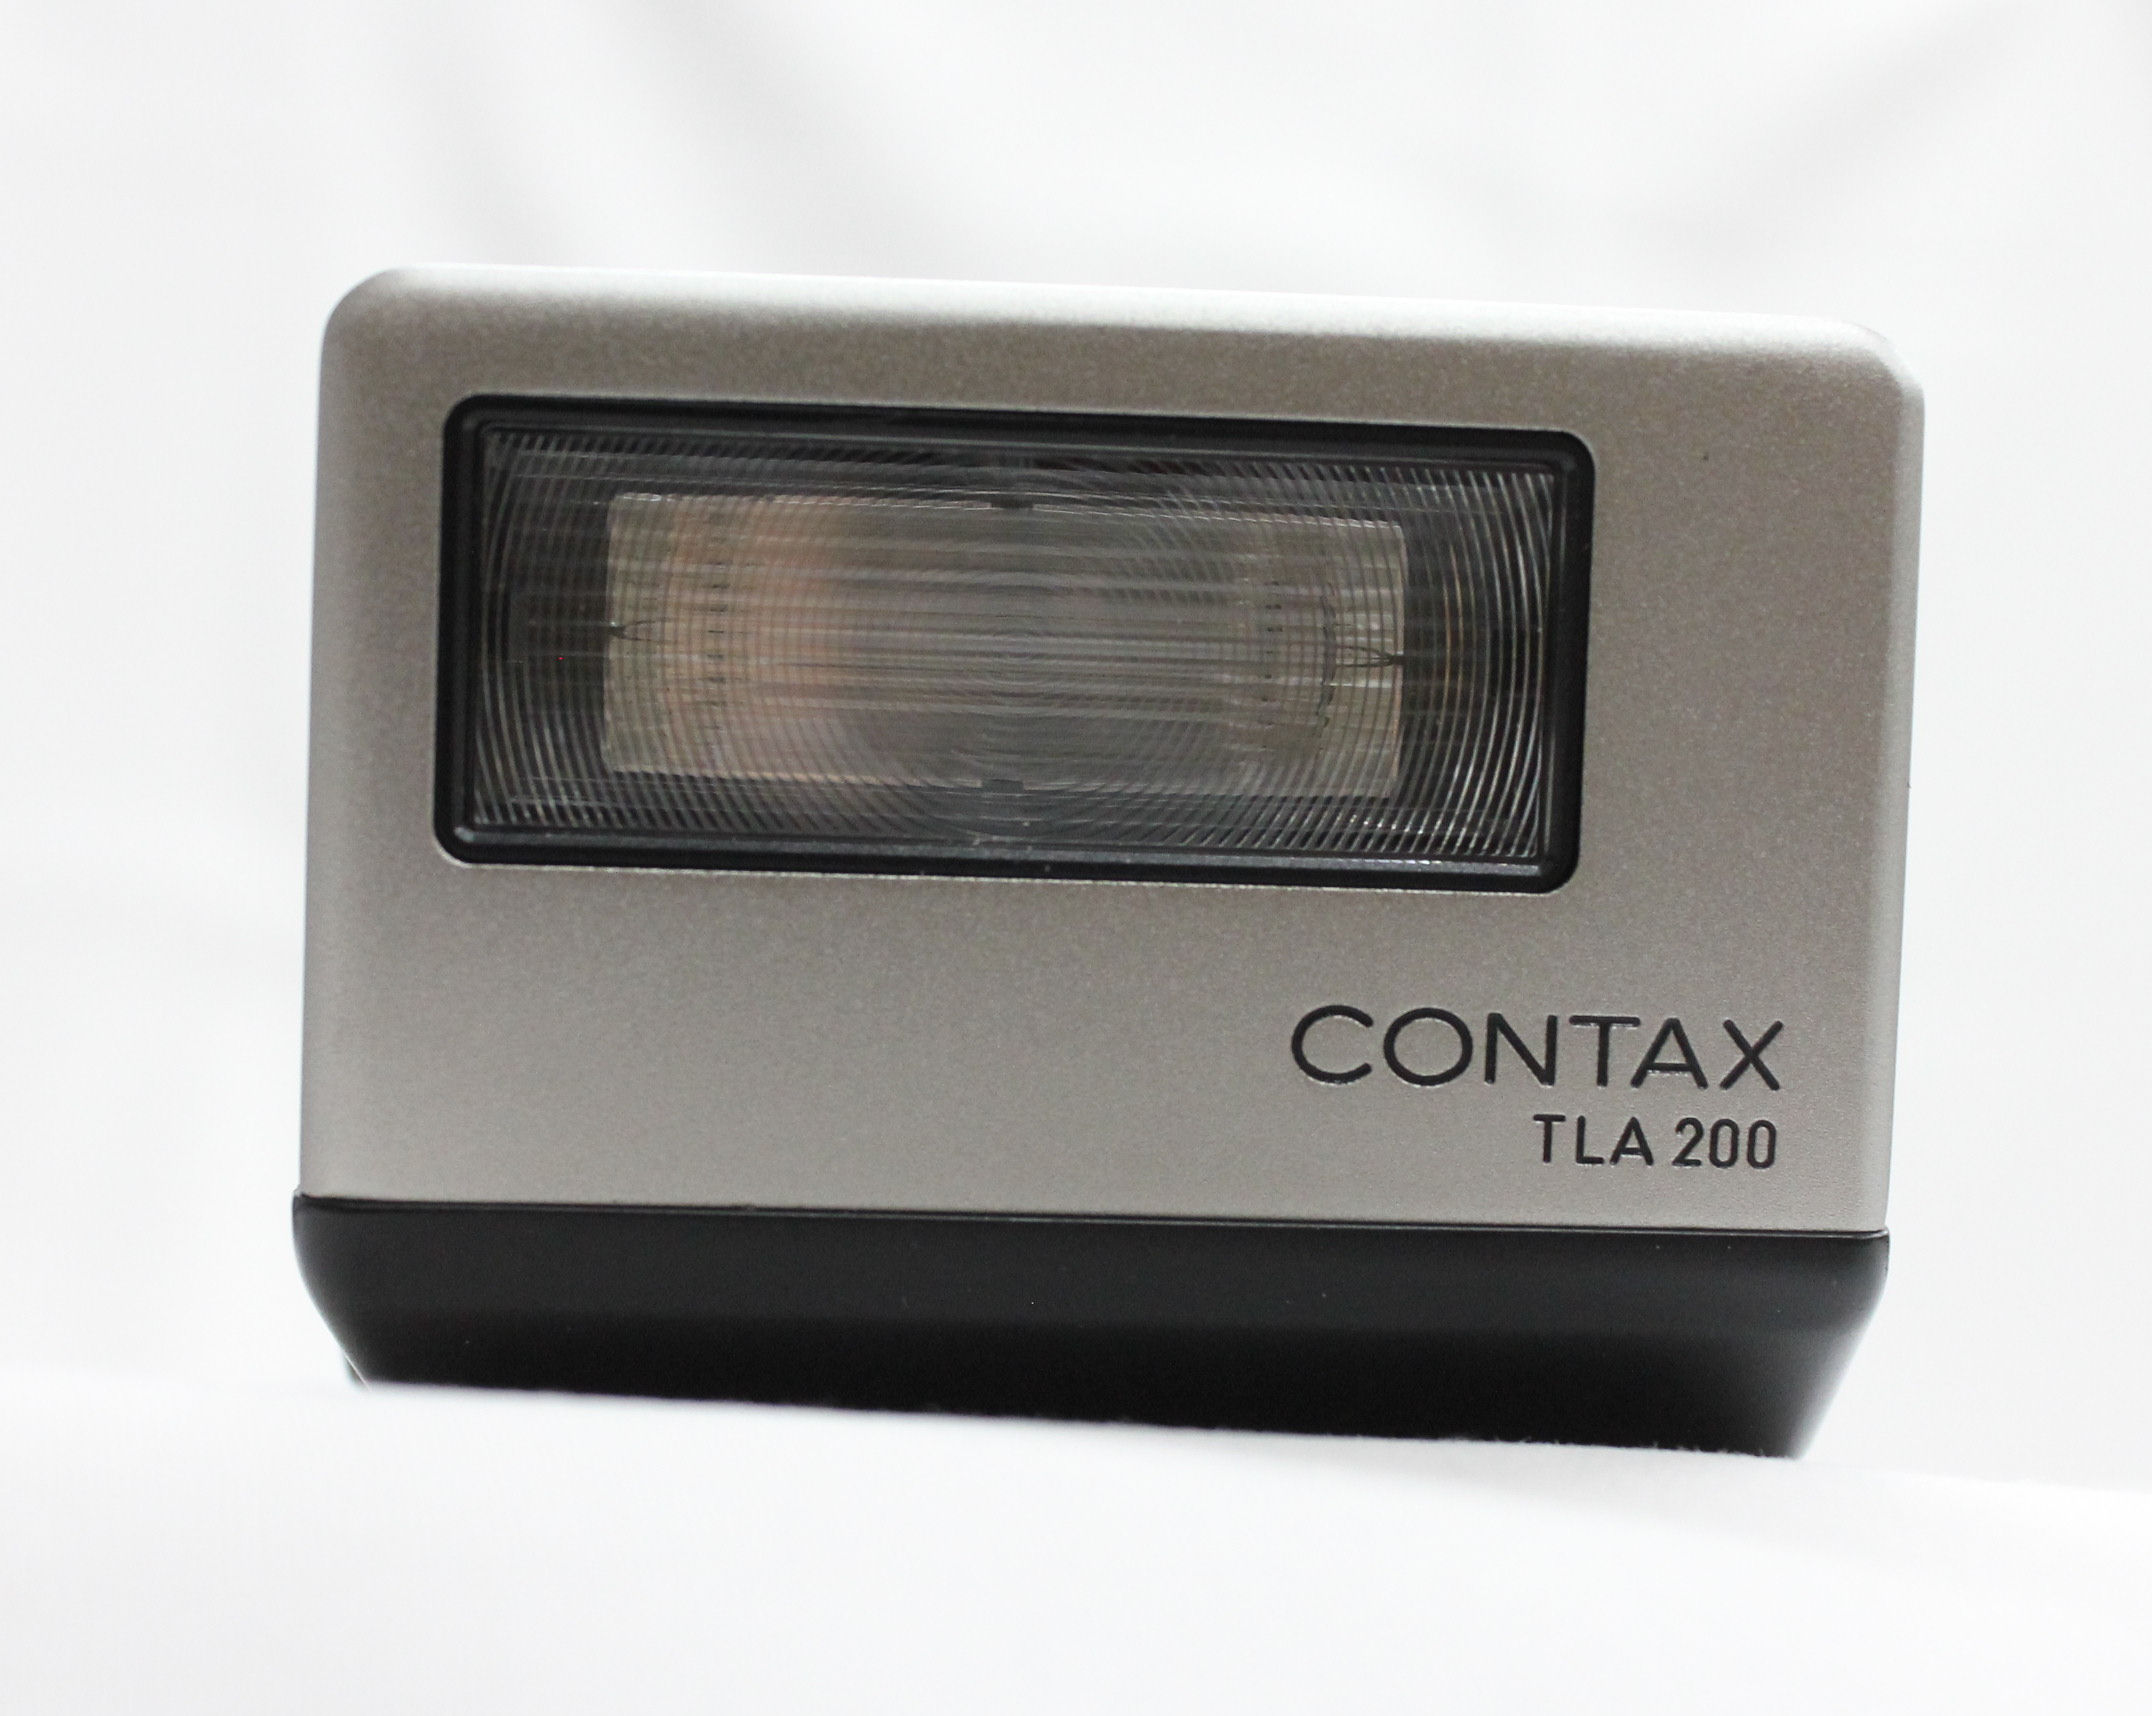  Contax TLA 200 Shoe Mount Flash w / Leather Case for G1 G2 from Japan Photo 1